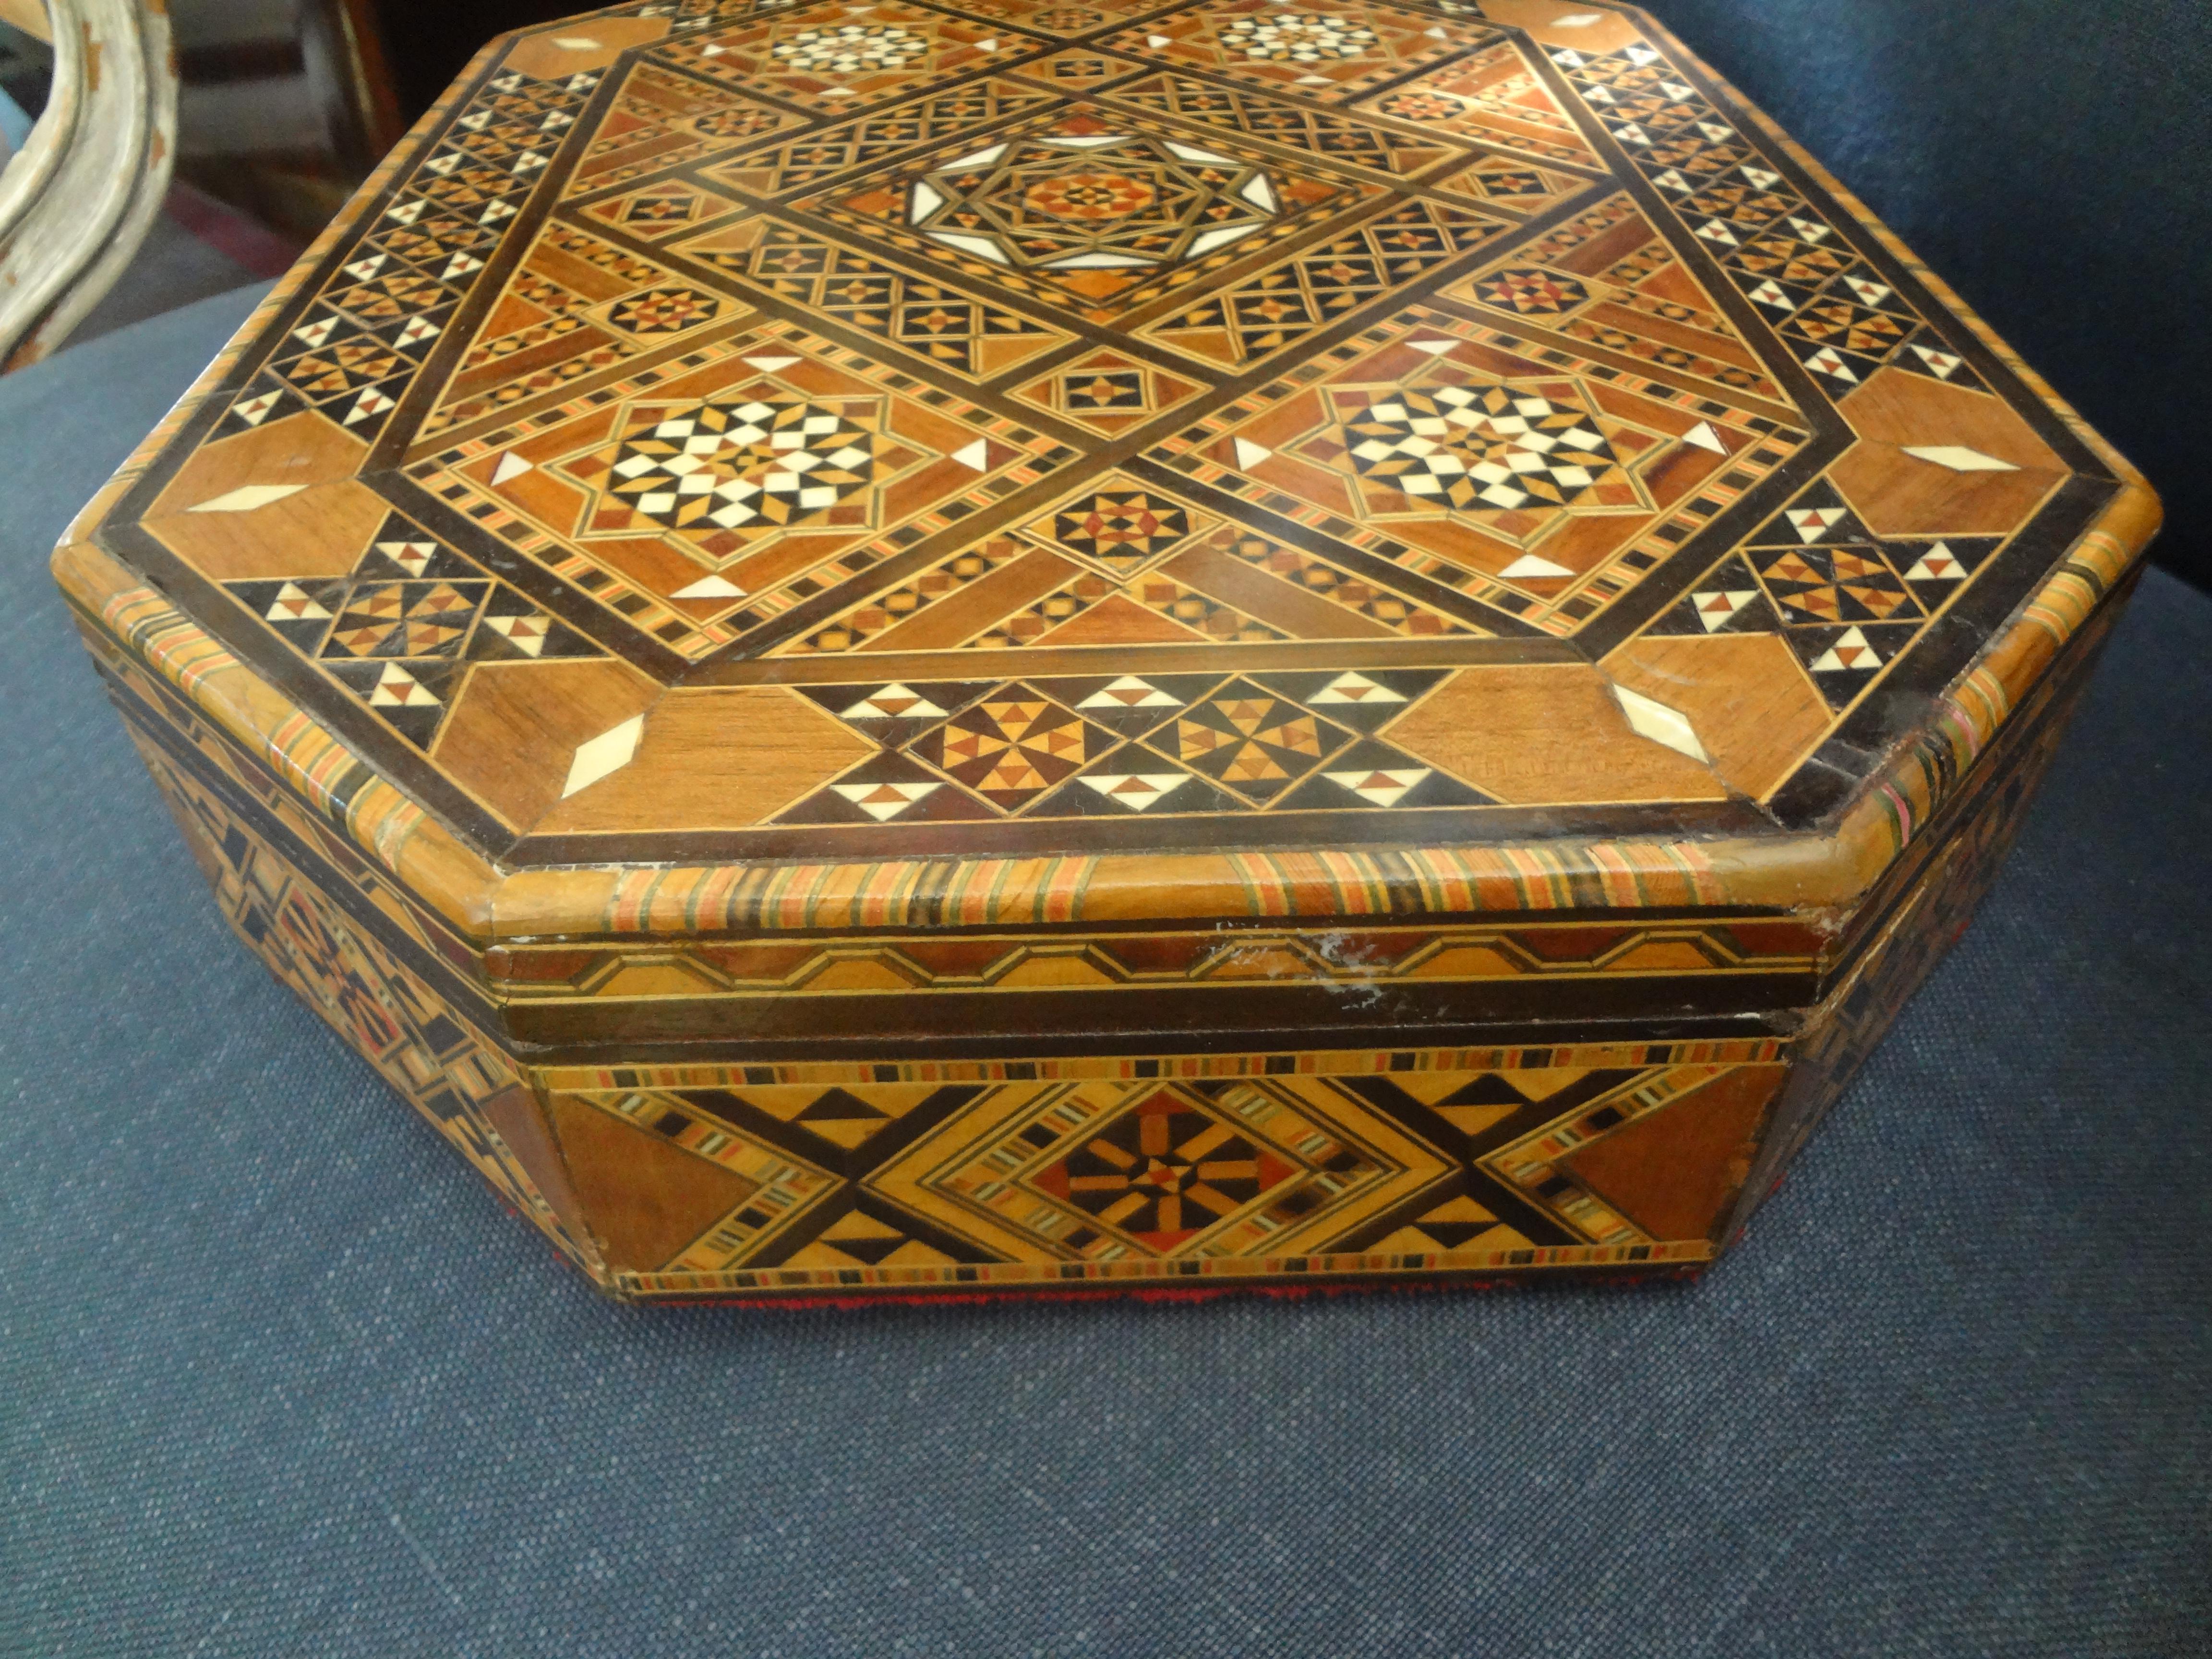 Stunning large handcrafted Moroccan, Syrian or Middle Eastern arabesque style octagonal box. Our handsome felt lined decorative box is inlaid with several types of wood and mother of pearl. Our large Syrian or Middle Eastern box is the perfect